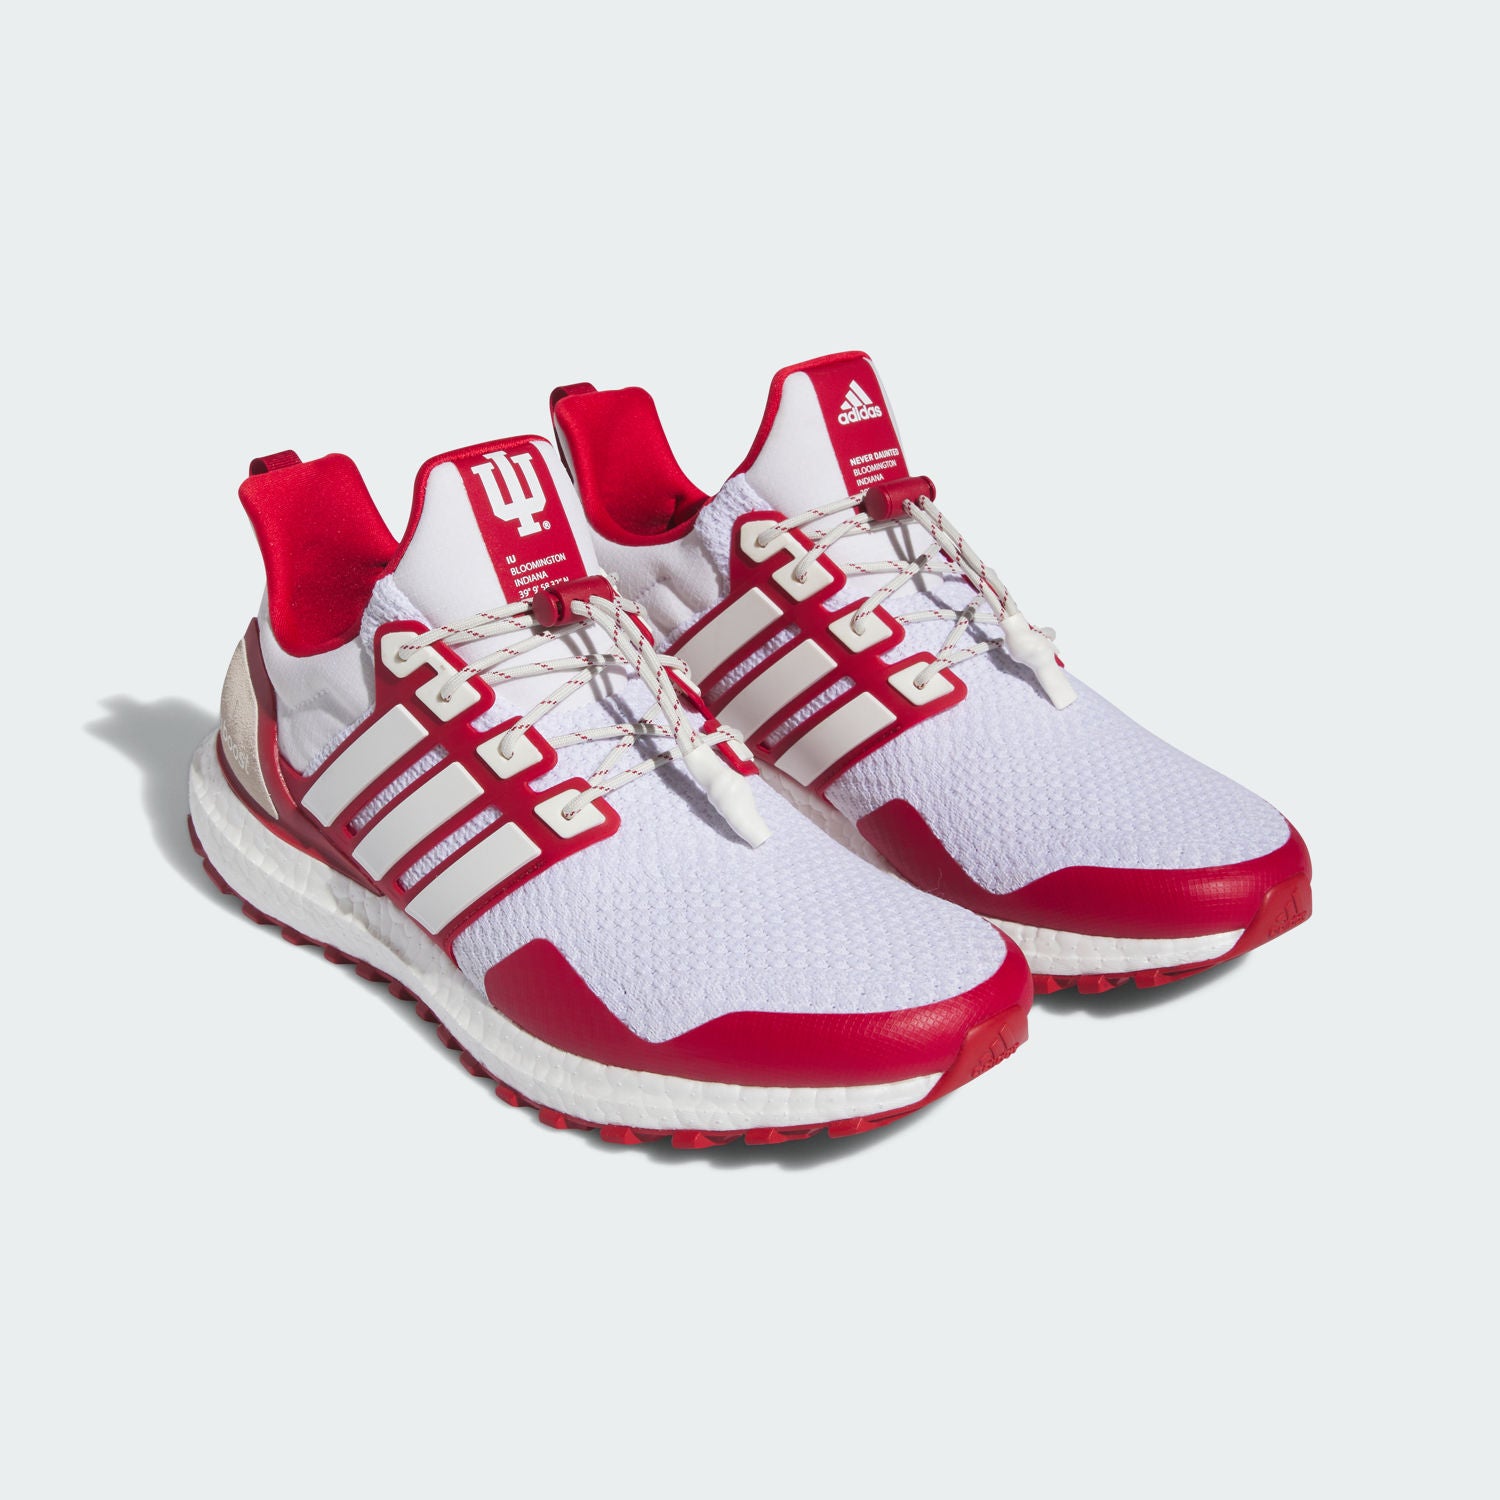 Indiana Hoosiers Adidas Ultraboost™ 1.0 - Official Indiana University Athletics Store